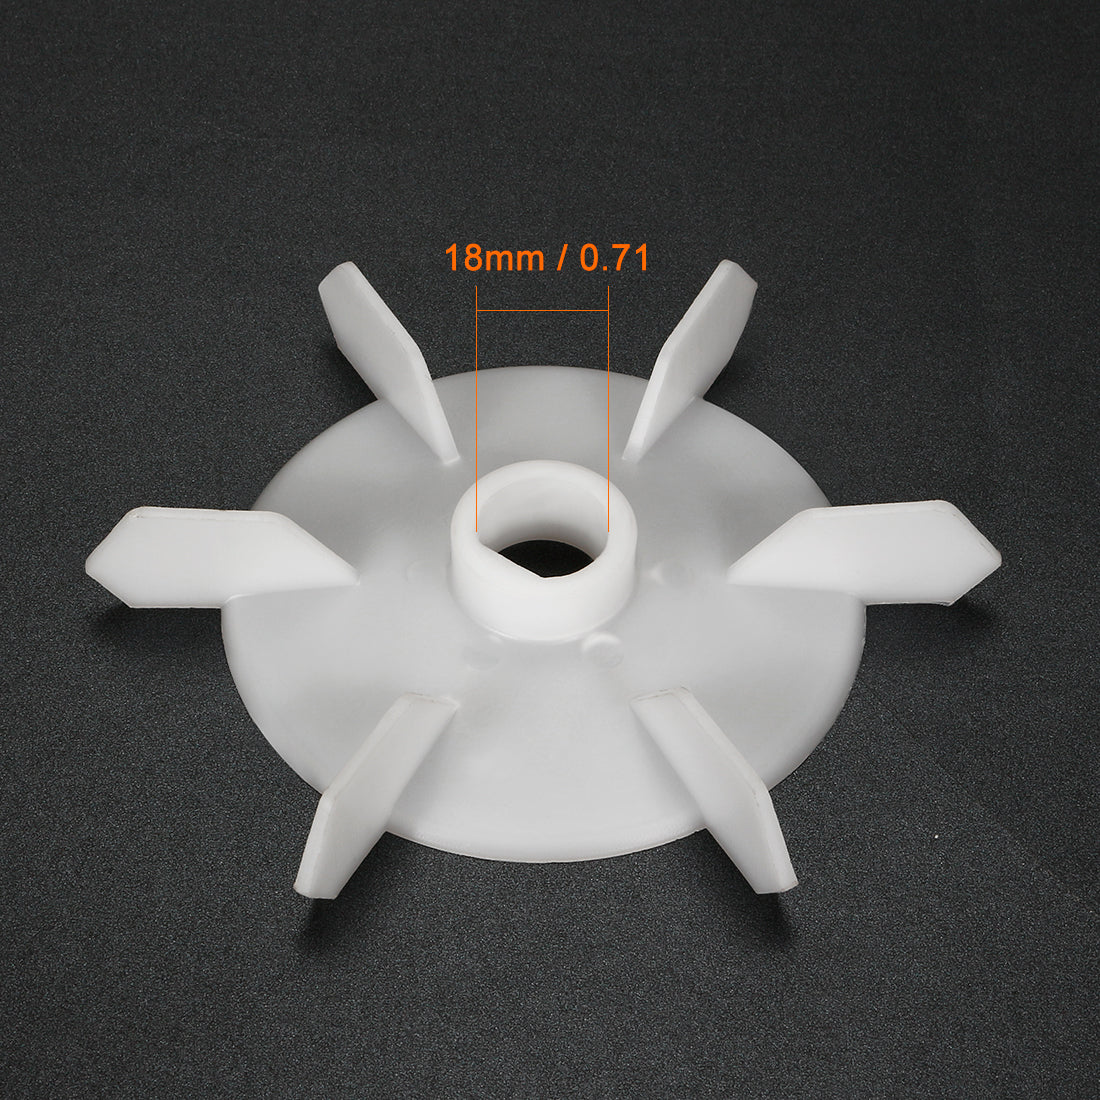 uxcell Uxcell 2Pcs 140*18mm D Shaft Replacement White Plastic 6 Impeller Motor Fan Vane